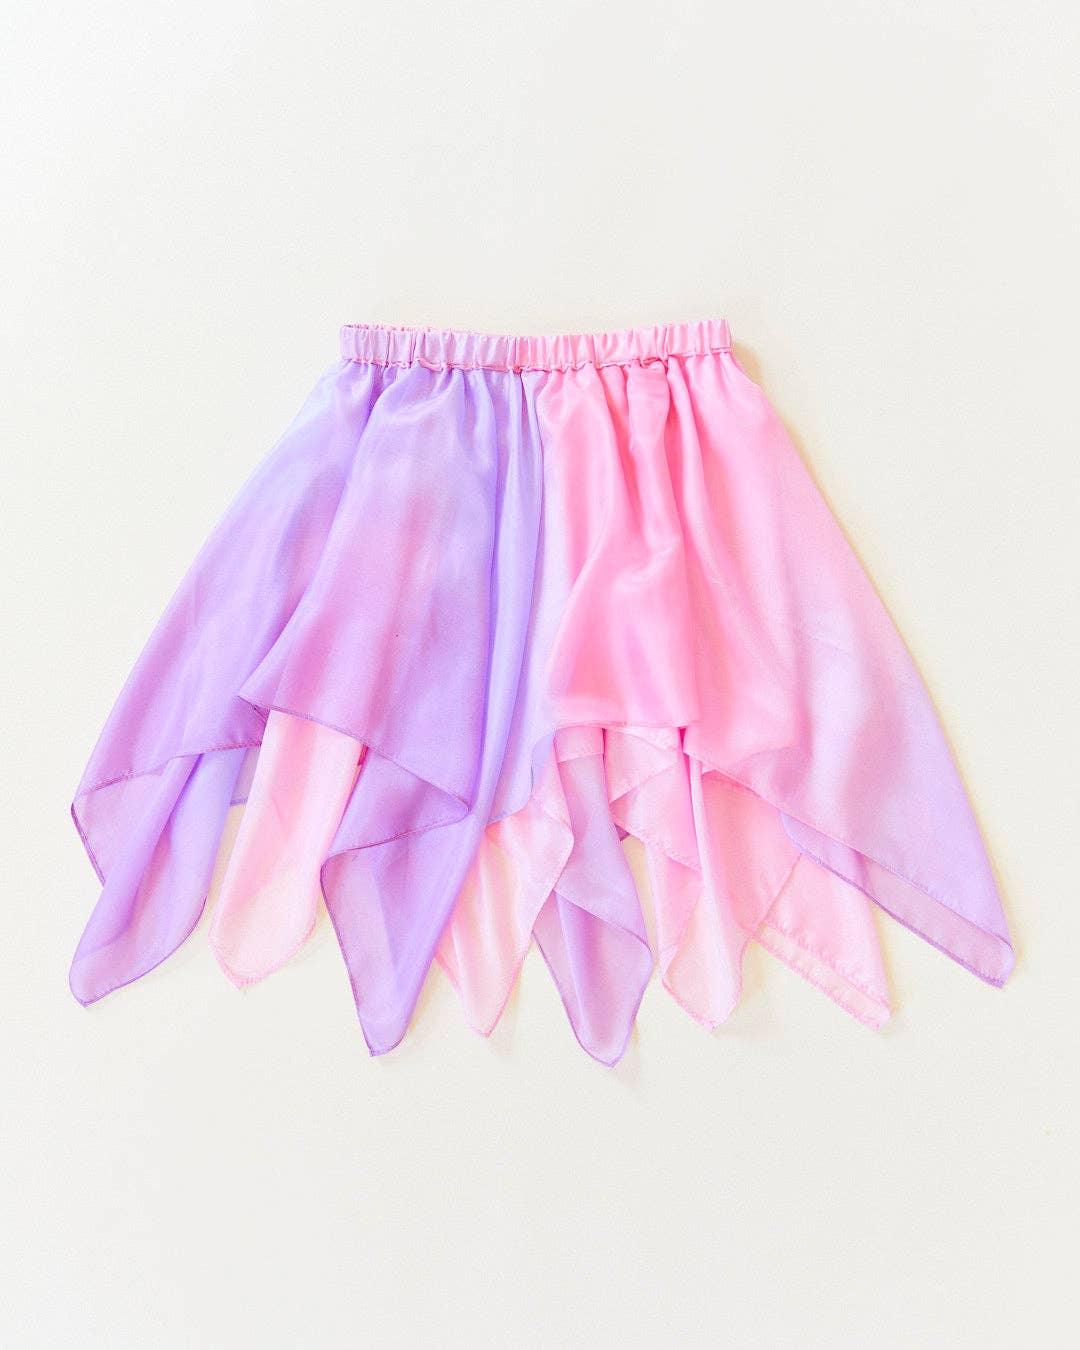 Fairy Skirt - 100% Silk Dress-Up for Pretend Play - Why and Whale